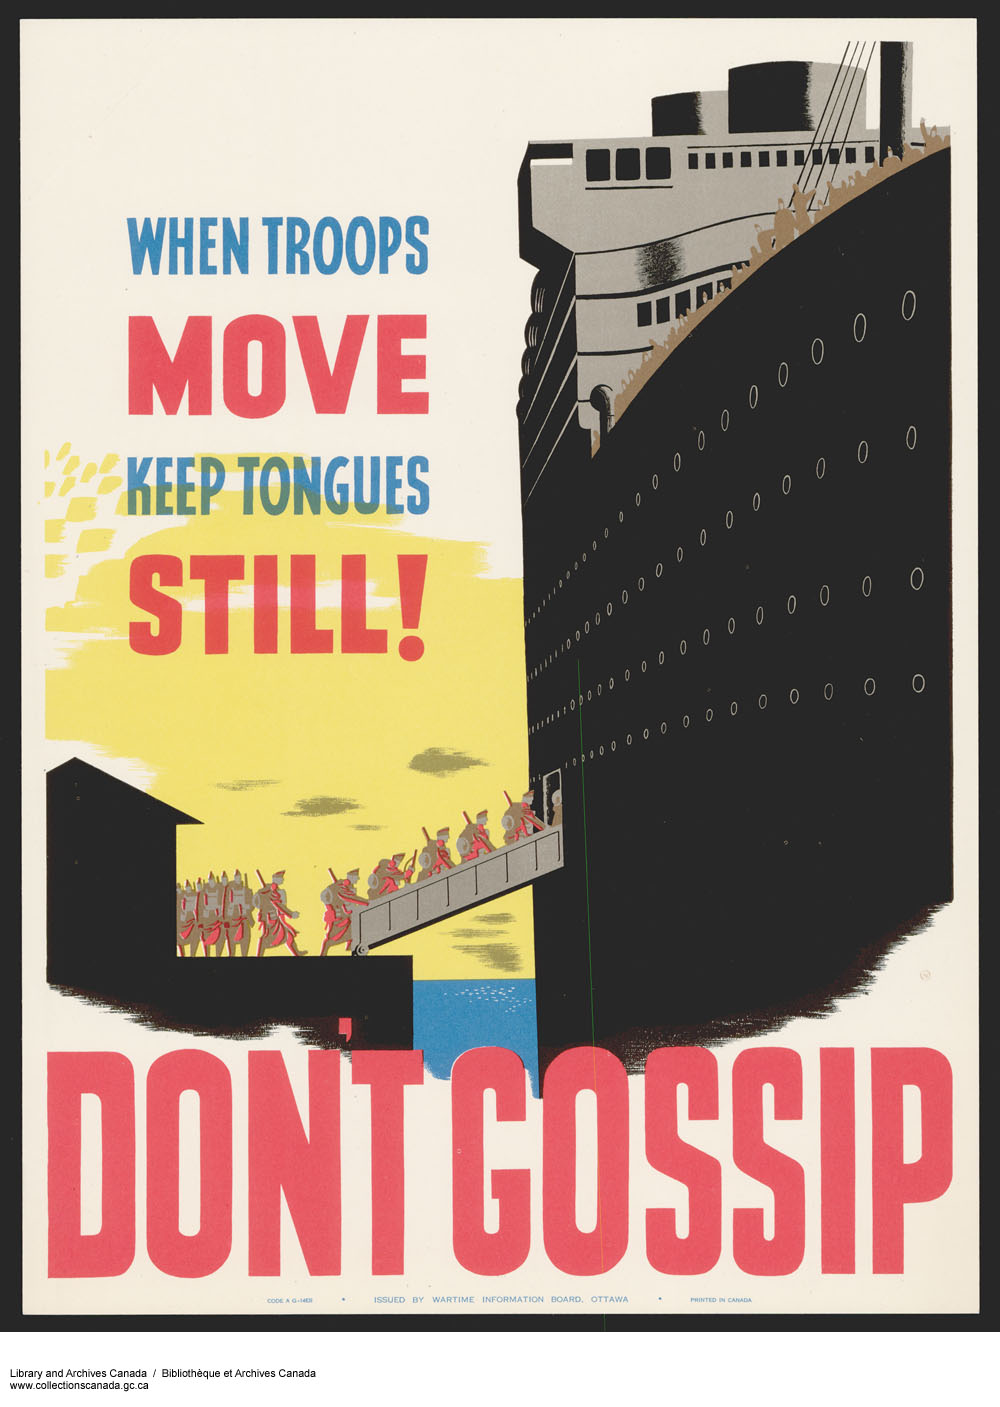 a vintage travel poster for the cruise ship's move